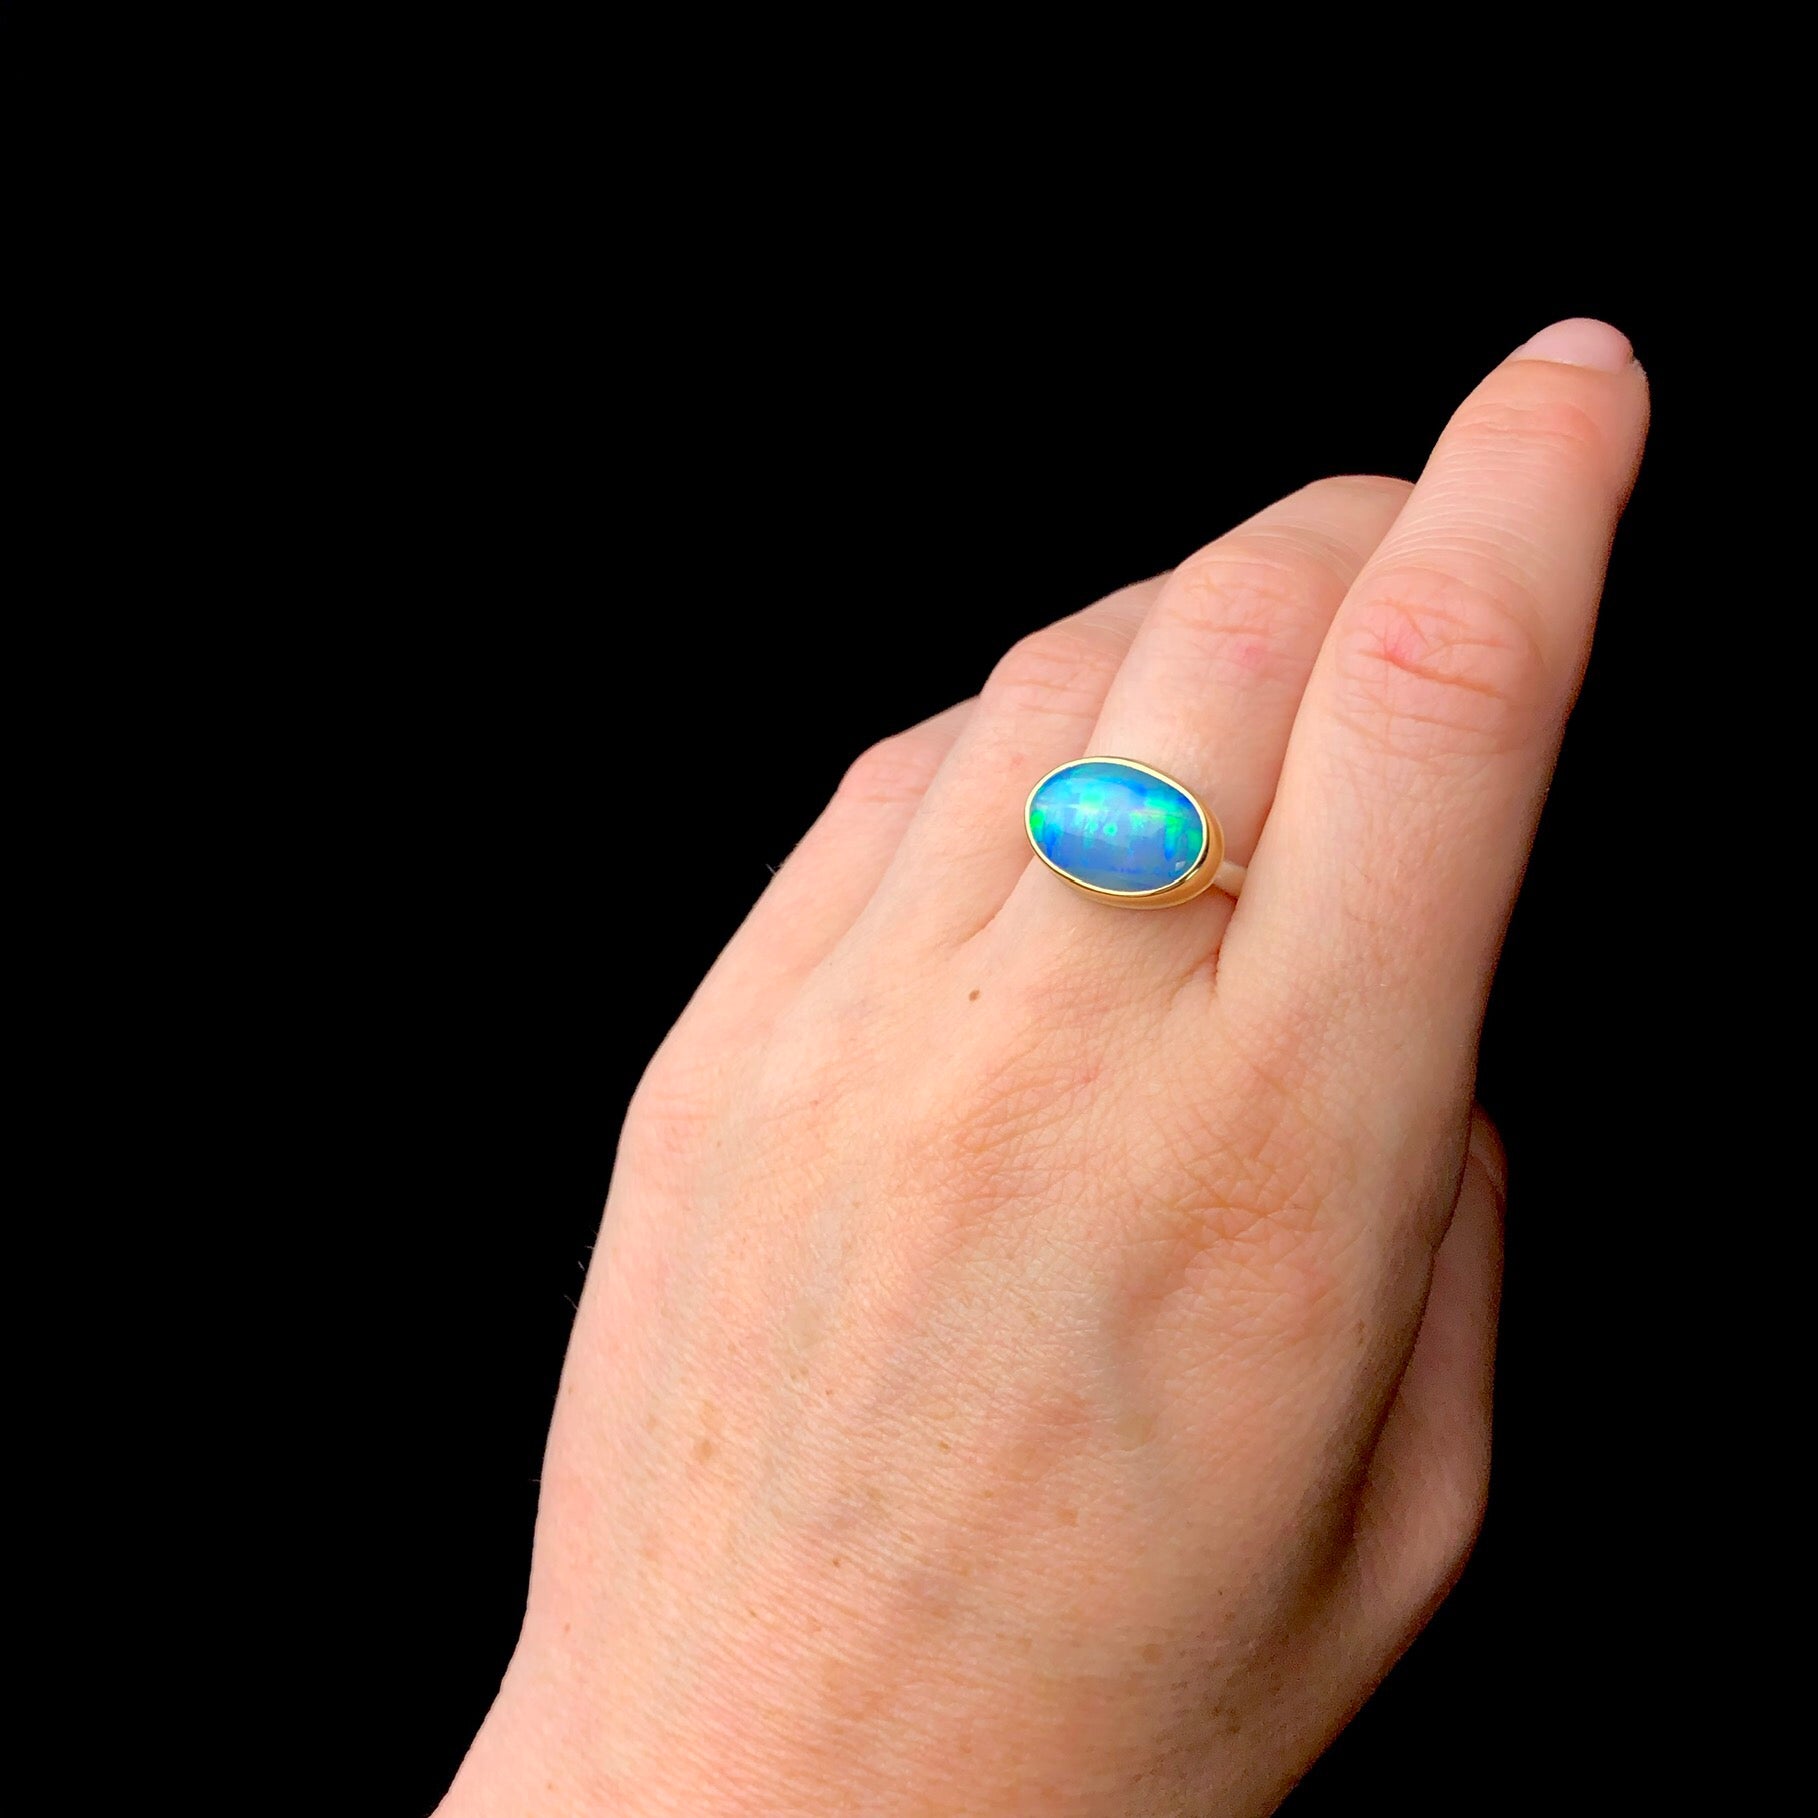 Blue and green jelly opal ring shown on hand